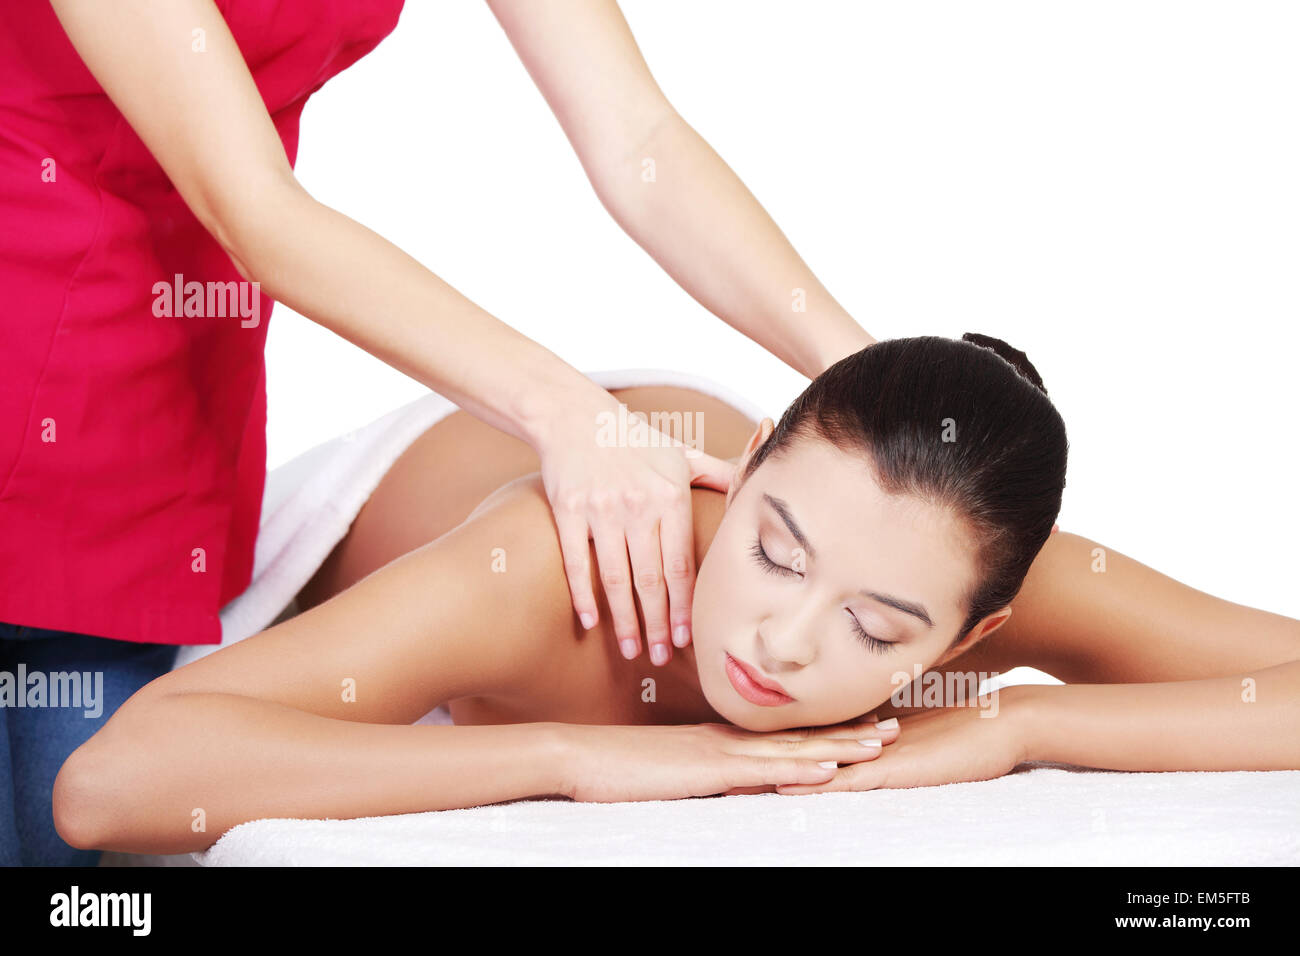 Preaty young woman relaxing heaving massage therapy Stock Photo